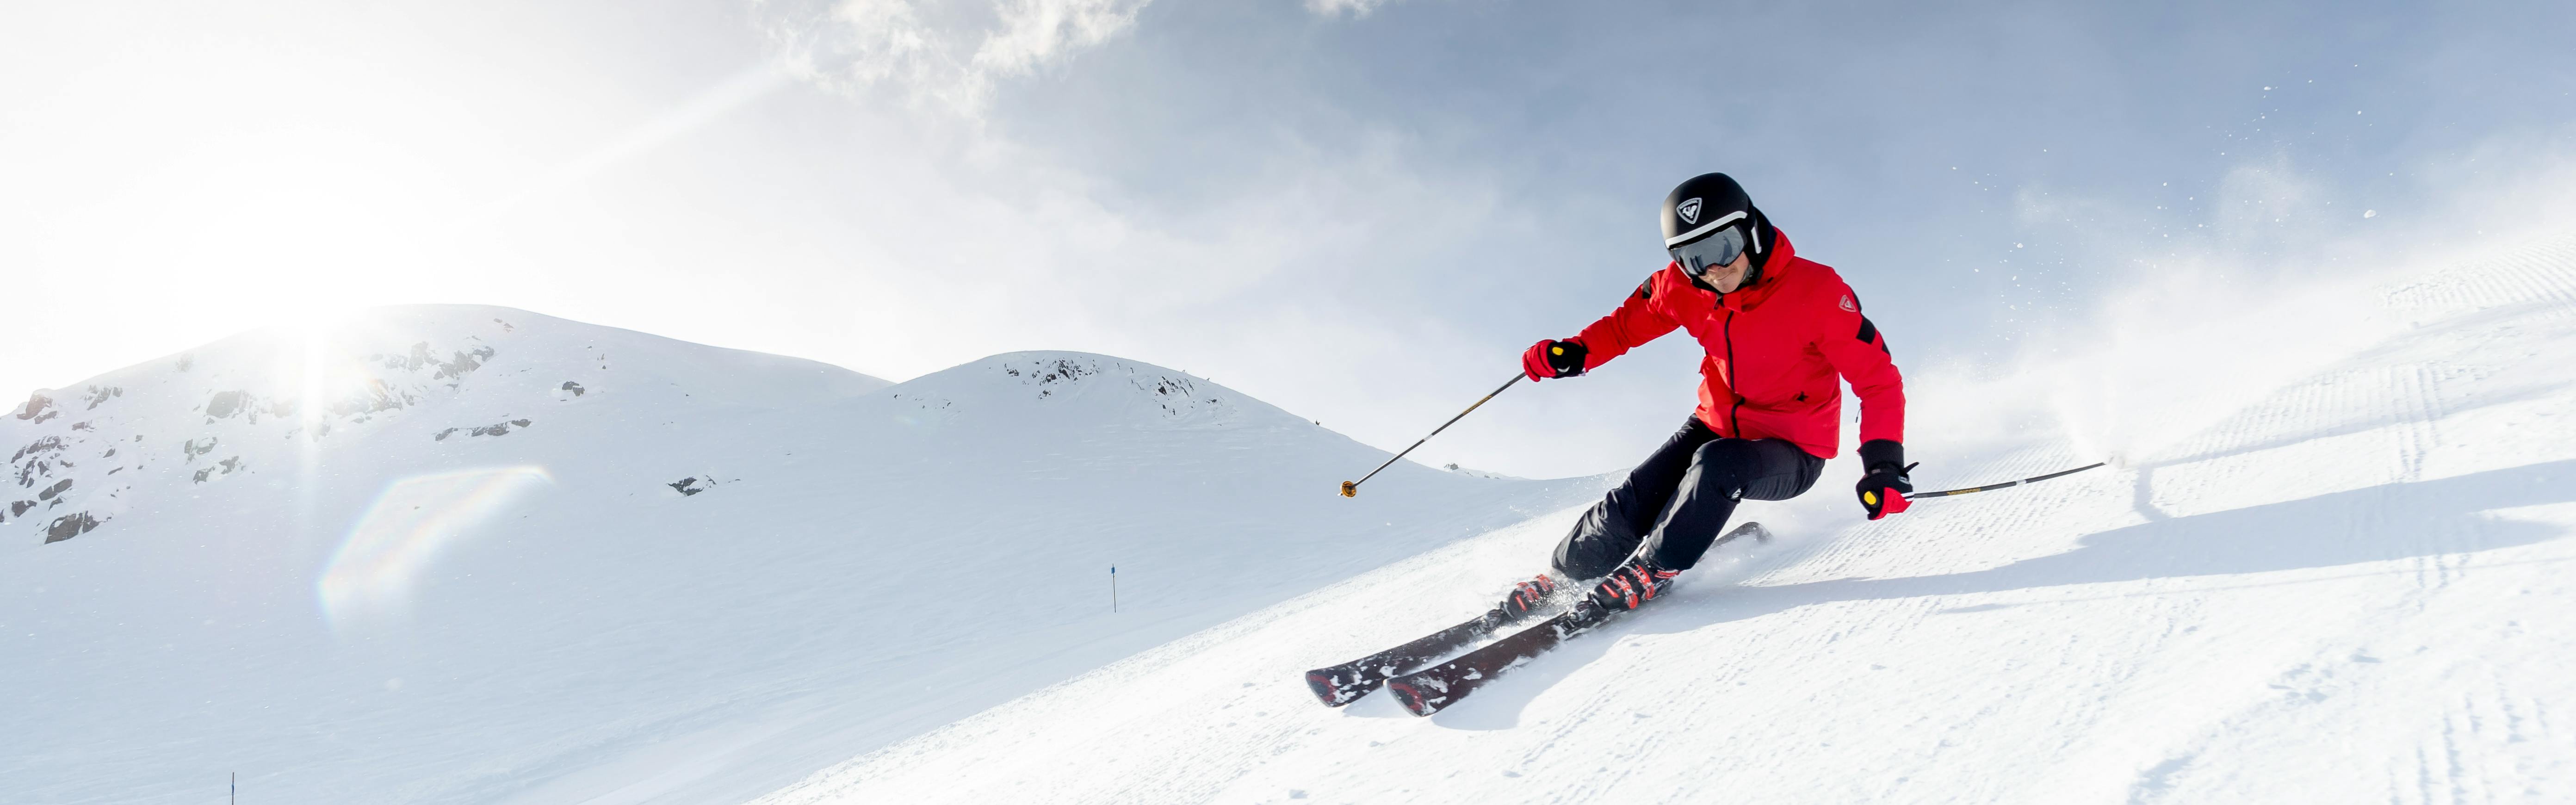 A skier in a red jacket and Rossignol skis heads downhill.